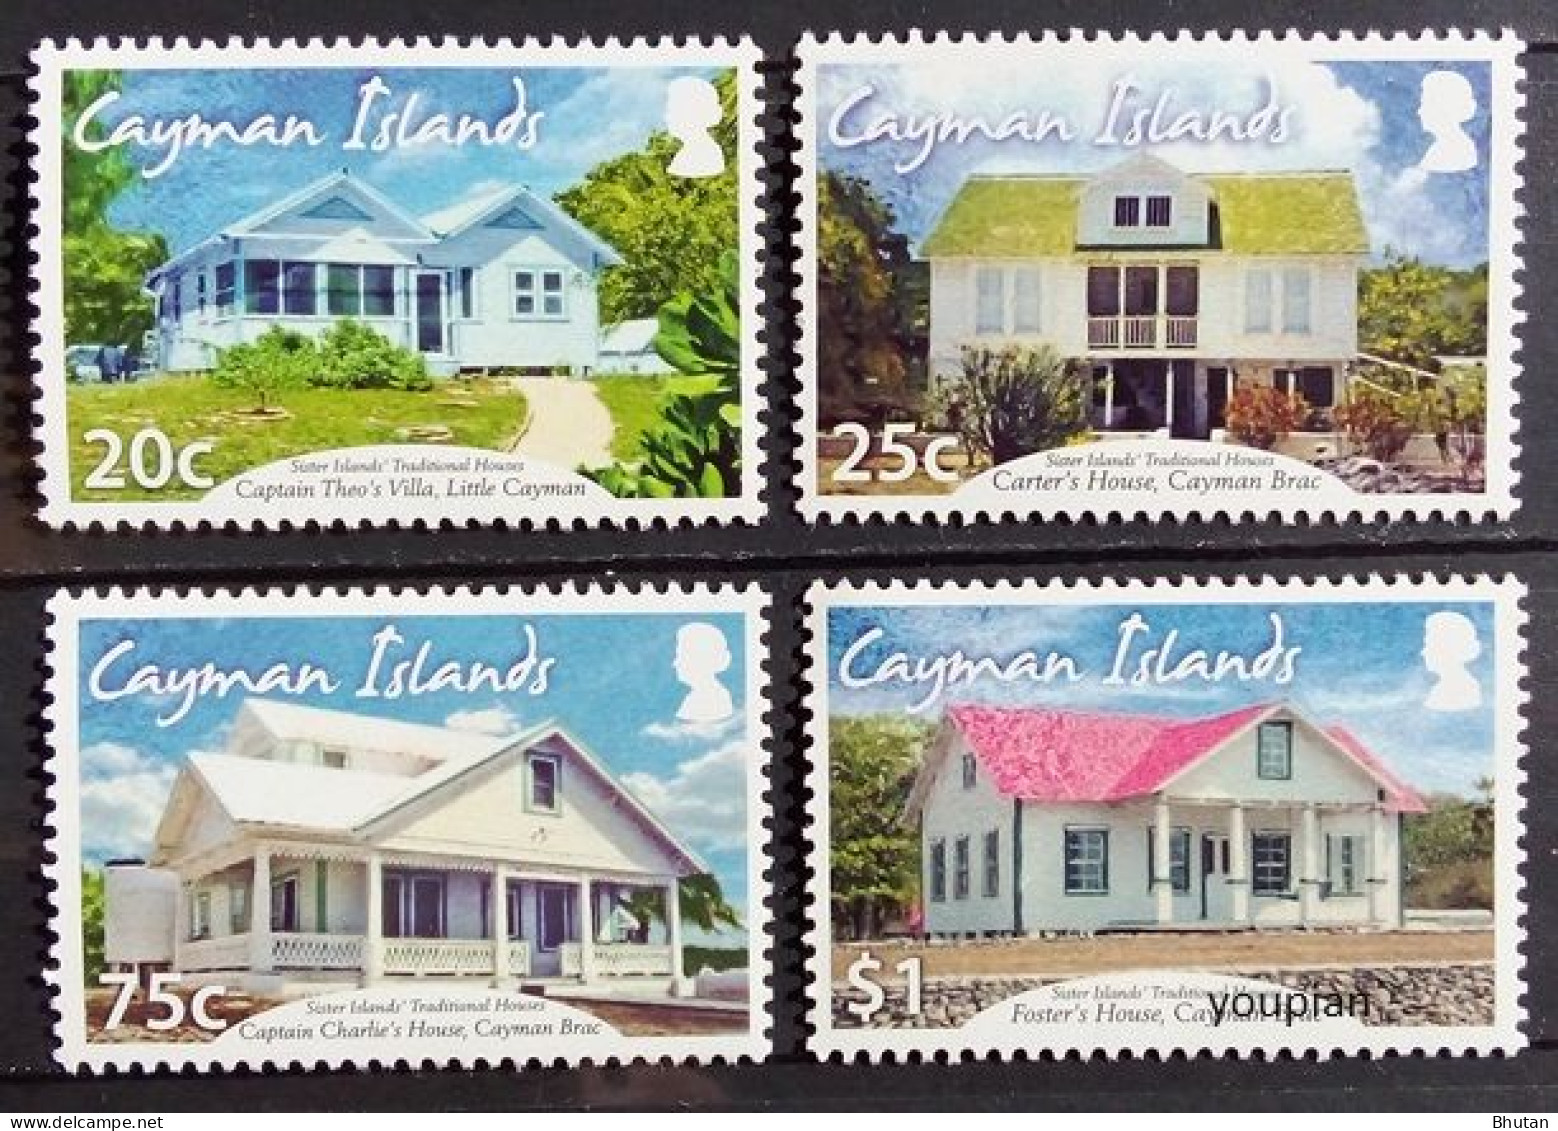 Cayman Islands 2014, Traditional Houses, MNH Stamps Set - Kaimaninseln